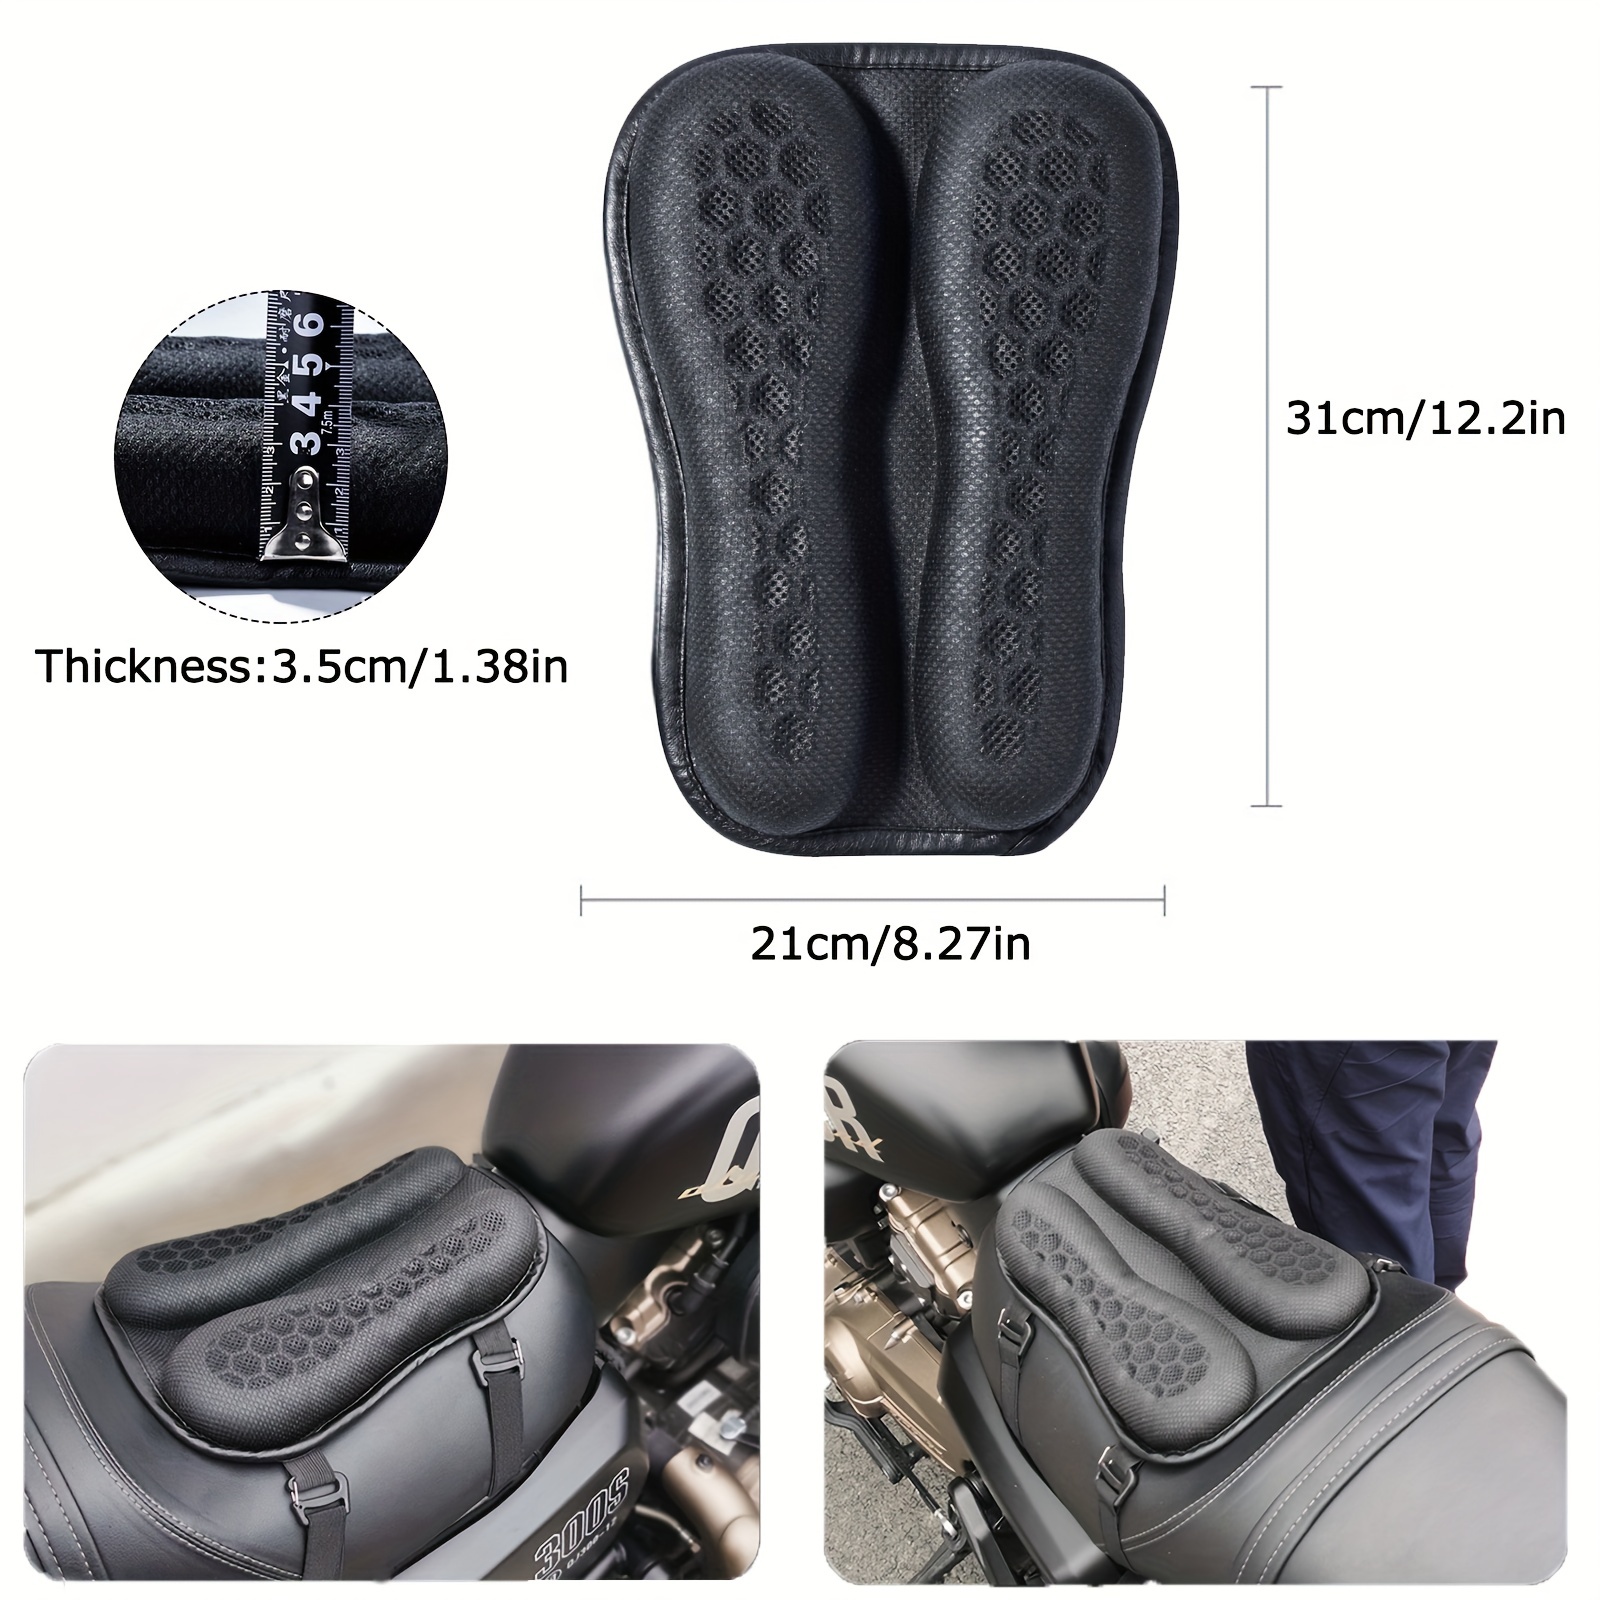 Lwuckbarrt Universal Motorcycle Gel Seat Cushion for Front/Rear Moto Seats  3D Honeycomb Motorcycle Seat Cover Structure Breathable Shock Absorption